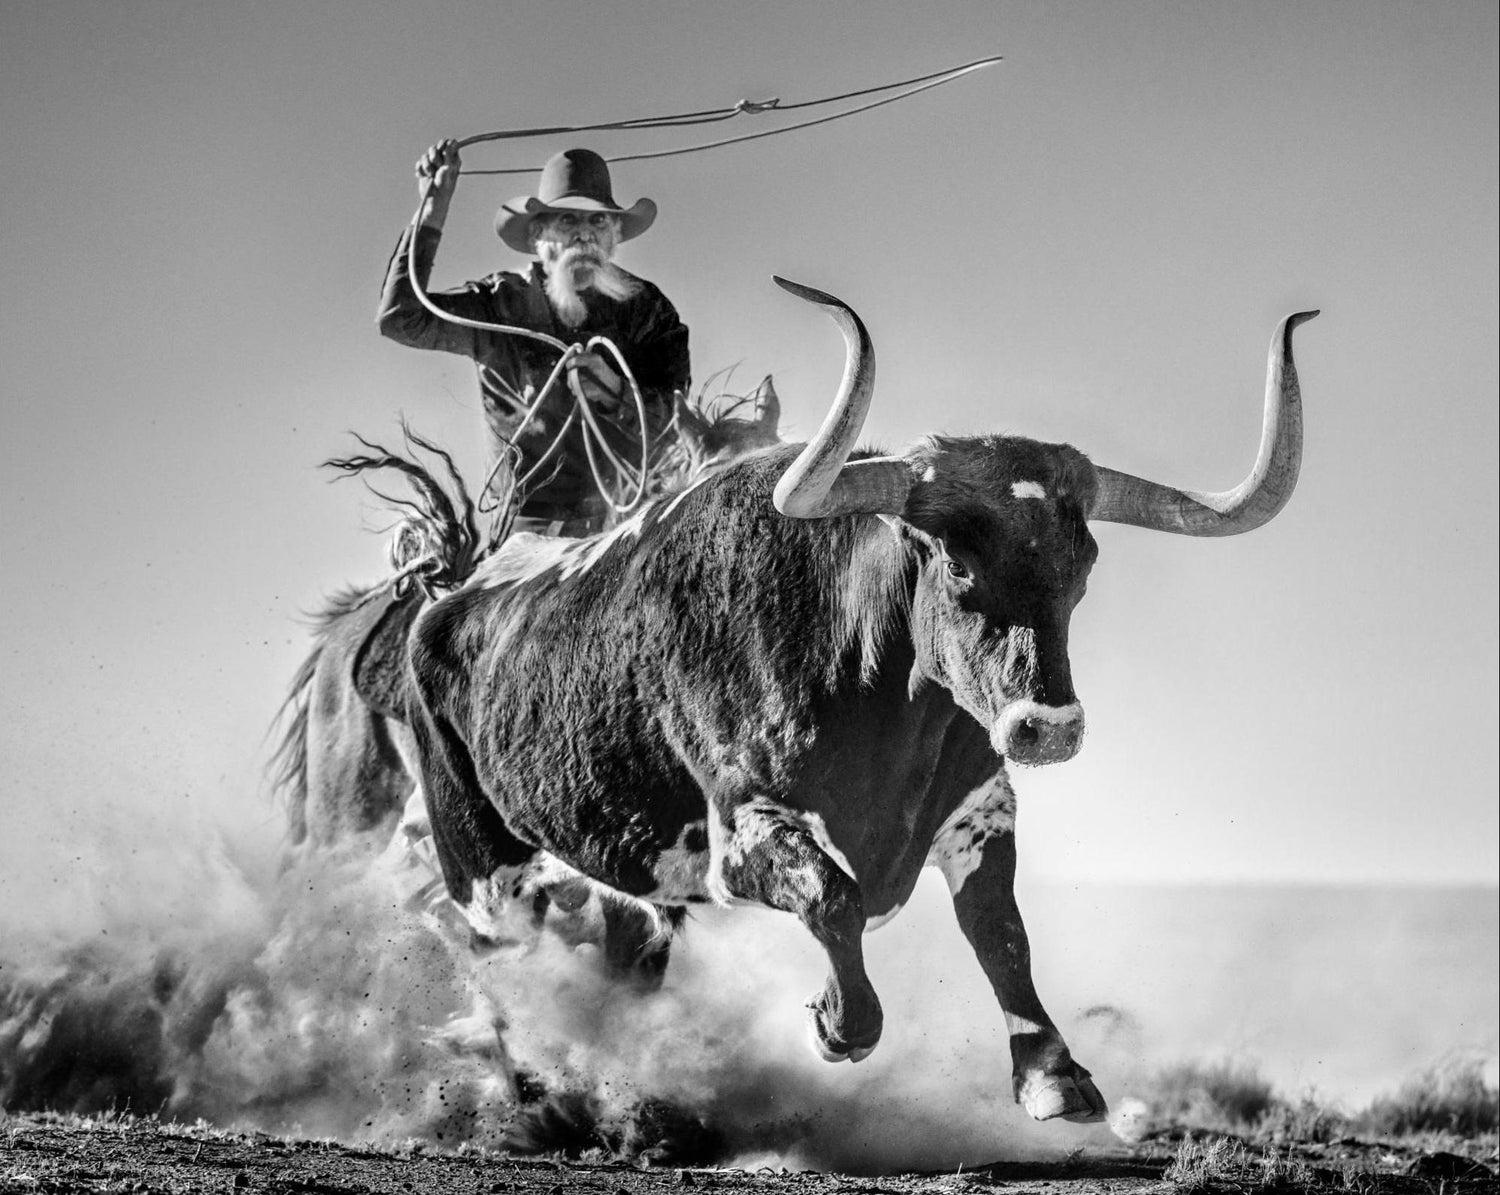 David Yarrow Black and White Photograph - Ain't My First Rodeo